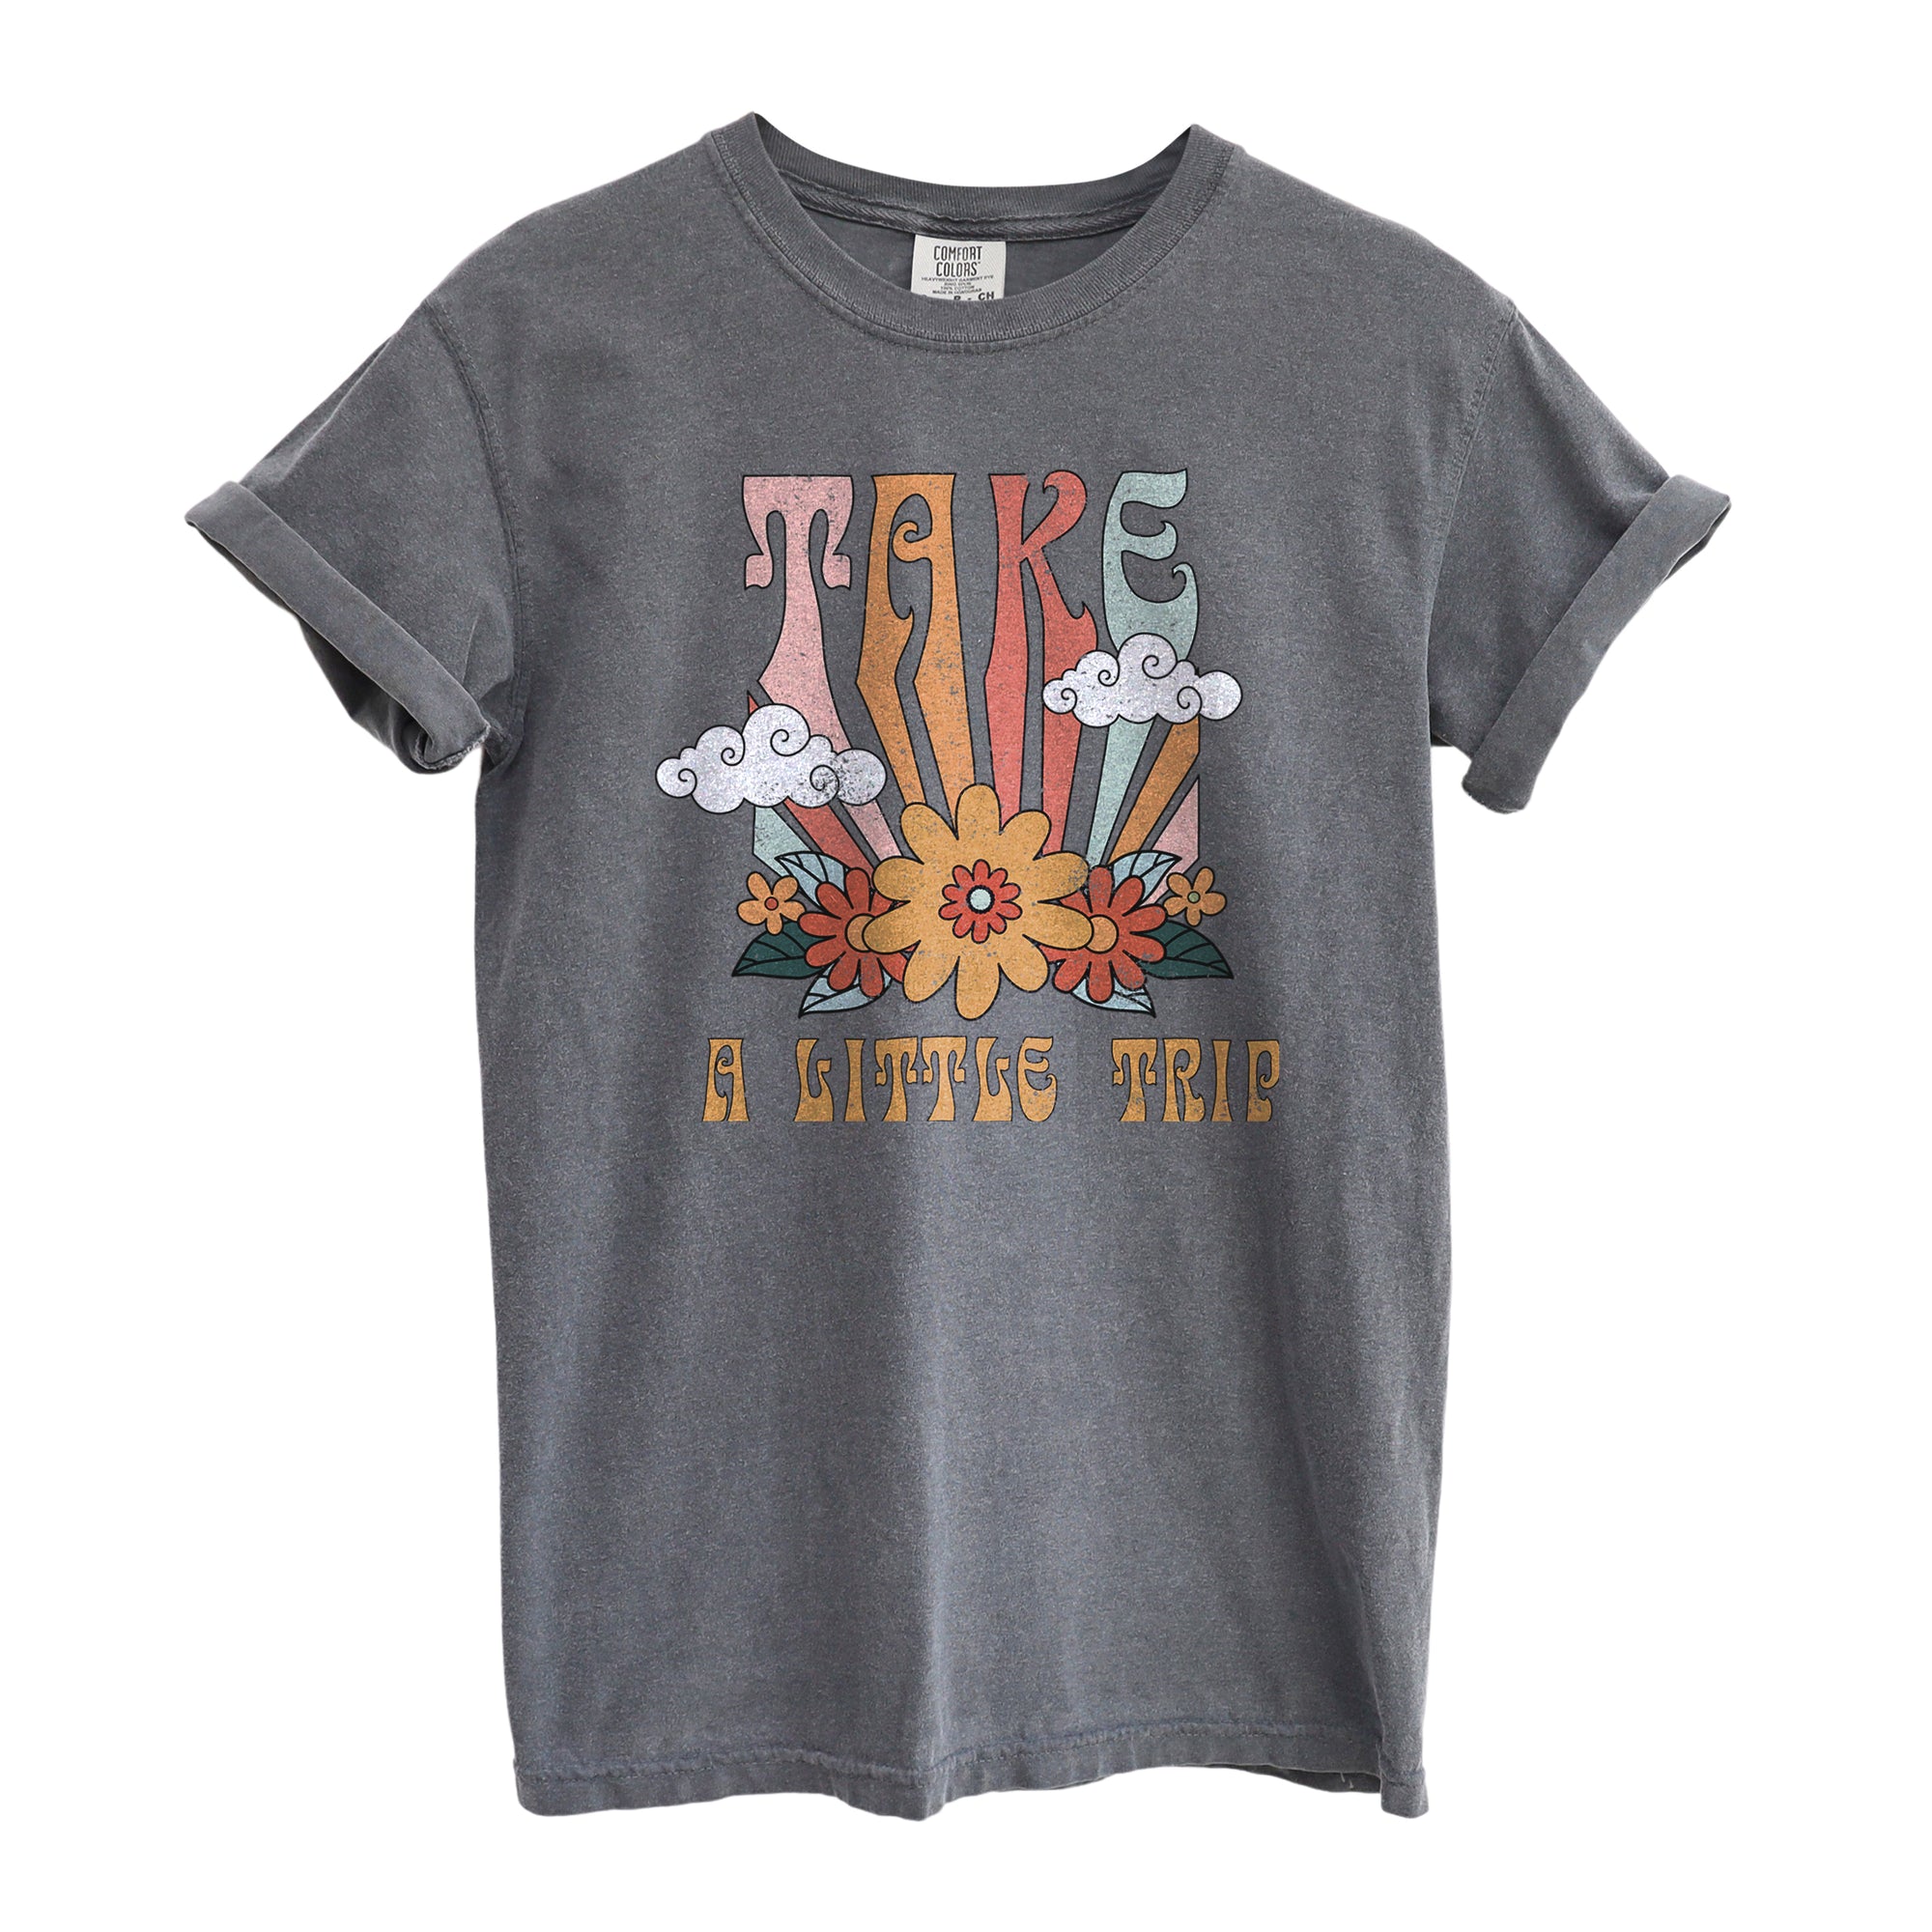 Take A Little Trip Oversized Shirt for Women & Men Garment-Dyed Graphic Tee